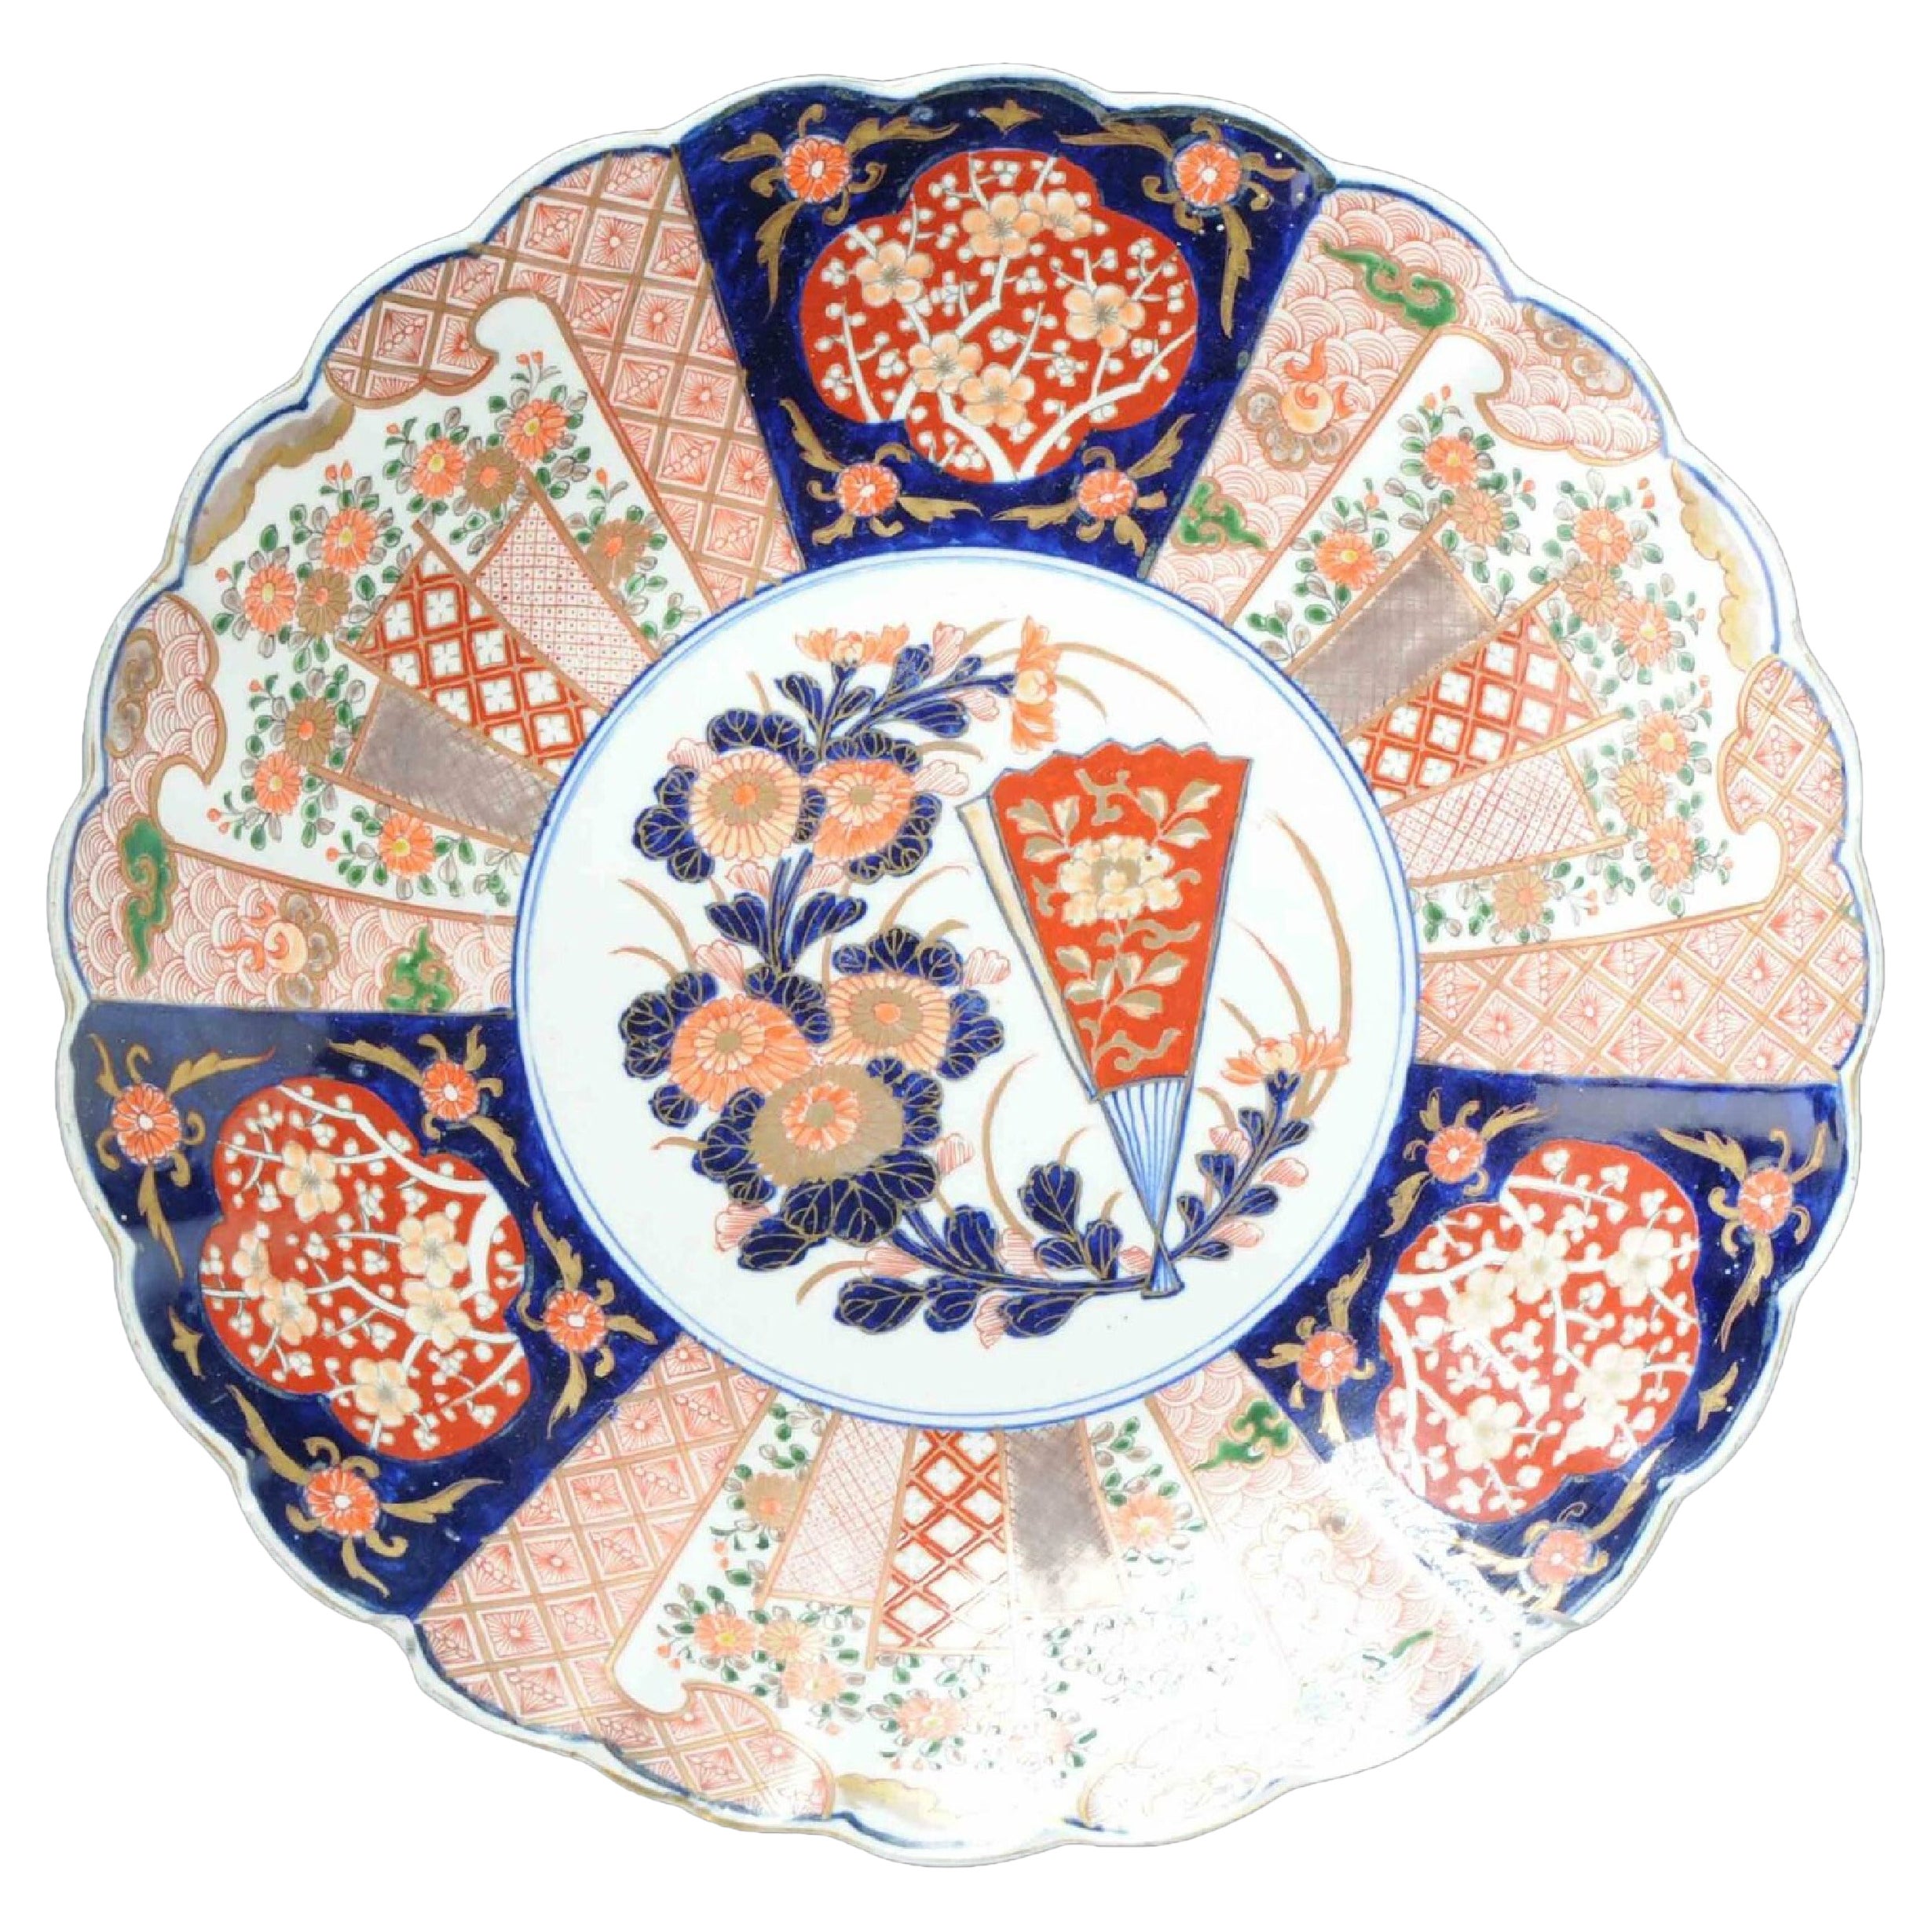 Antique Japanese Arita Imari Charger with Different Flowers, 19th Century